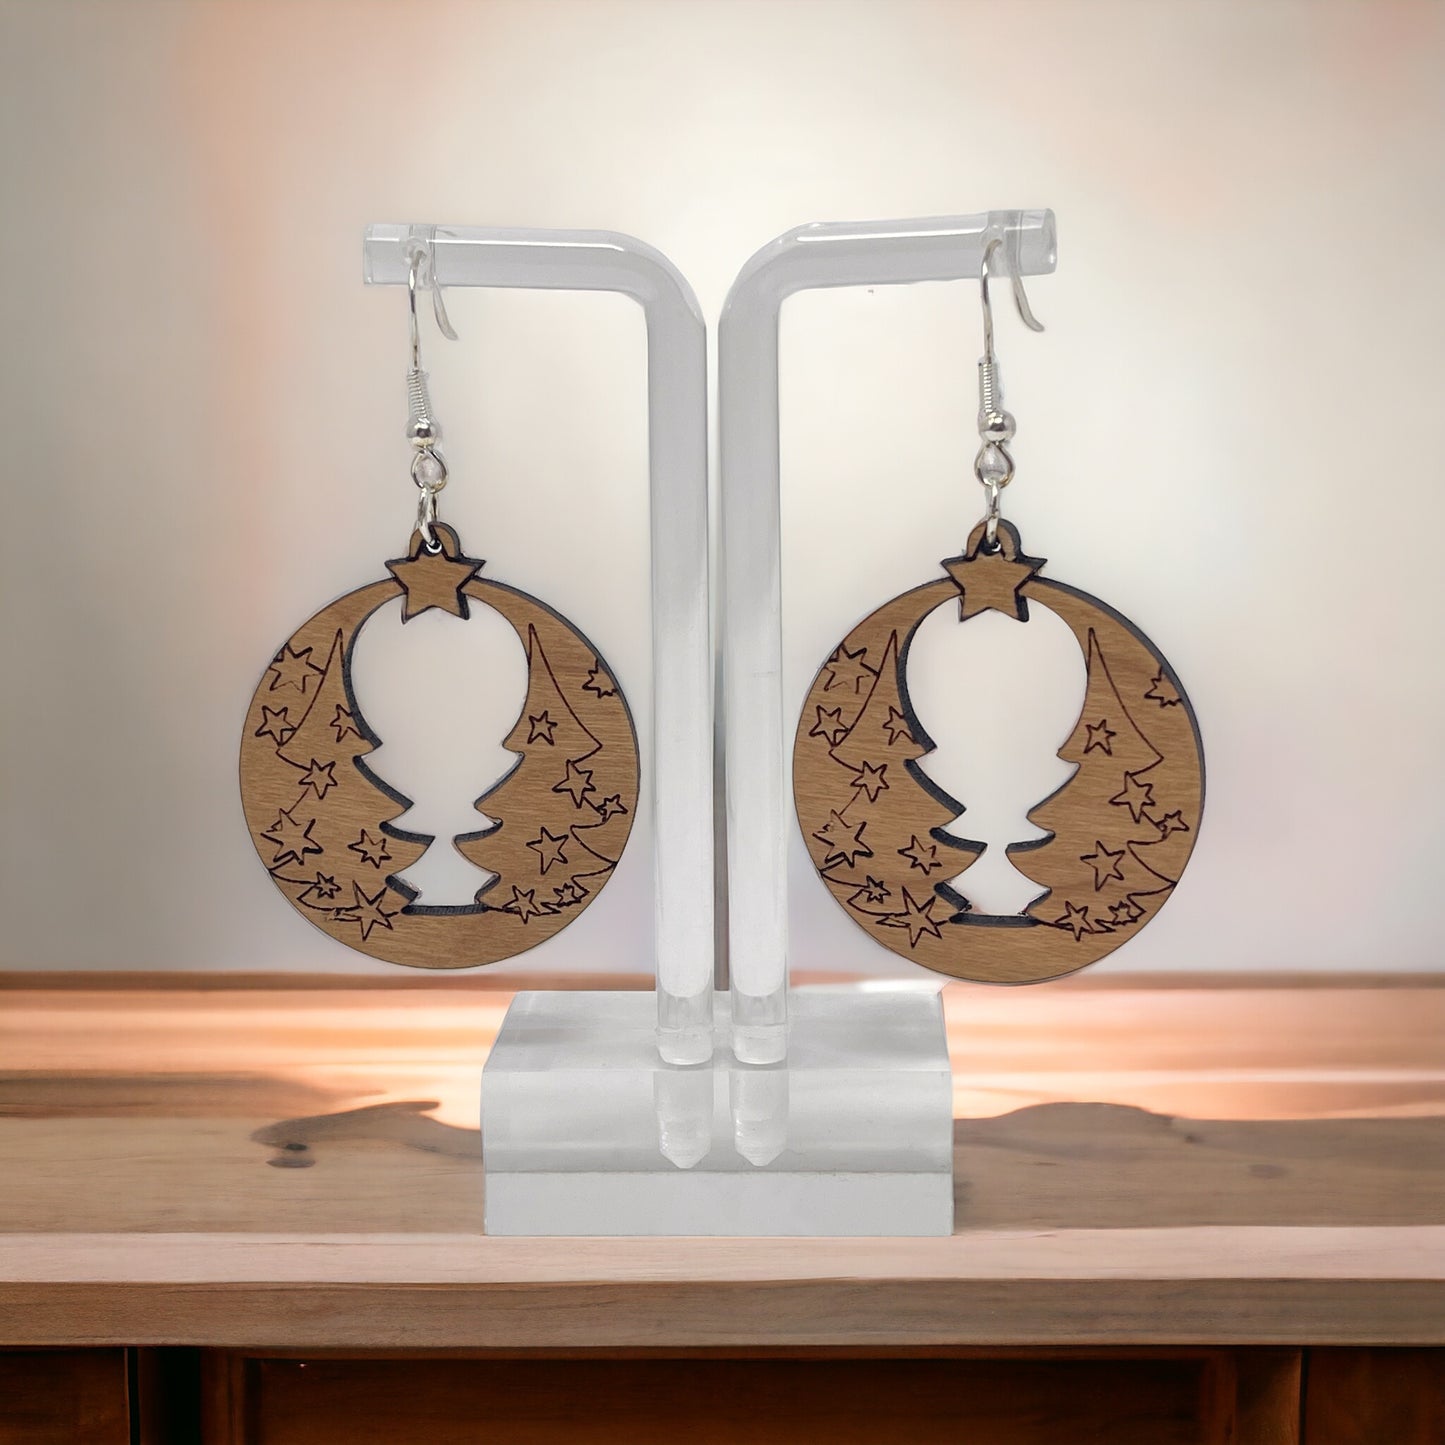 Christmas Tree Wood Earrings - Rustic Dangle Pine Tree Design, Cute Winter Holiday Accessories with a Natural Touch